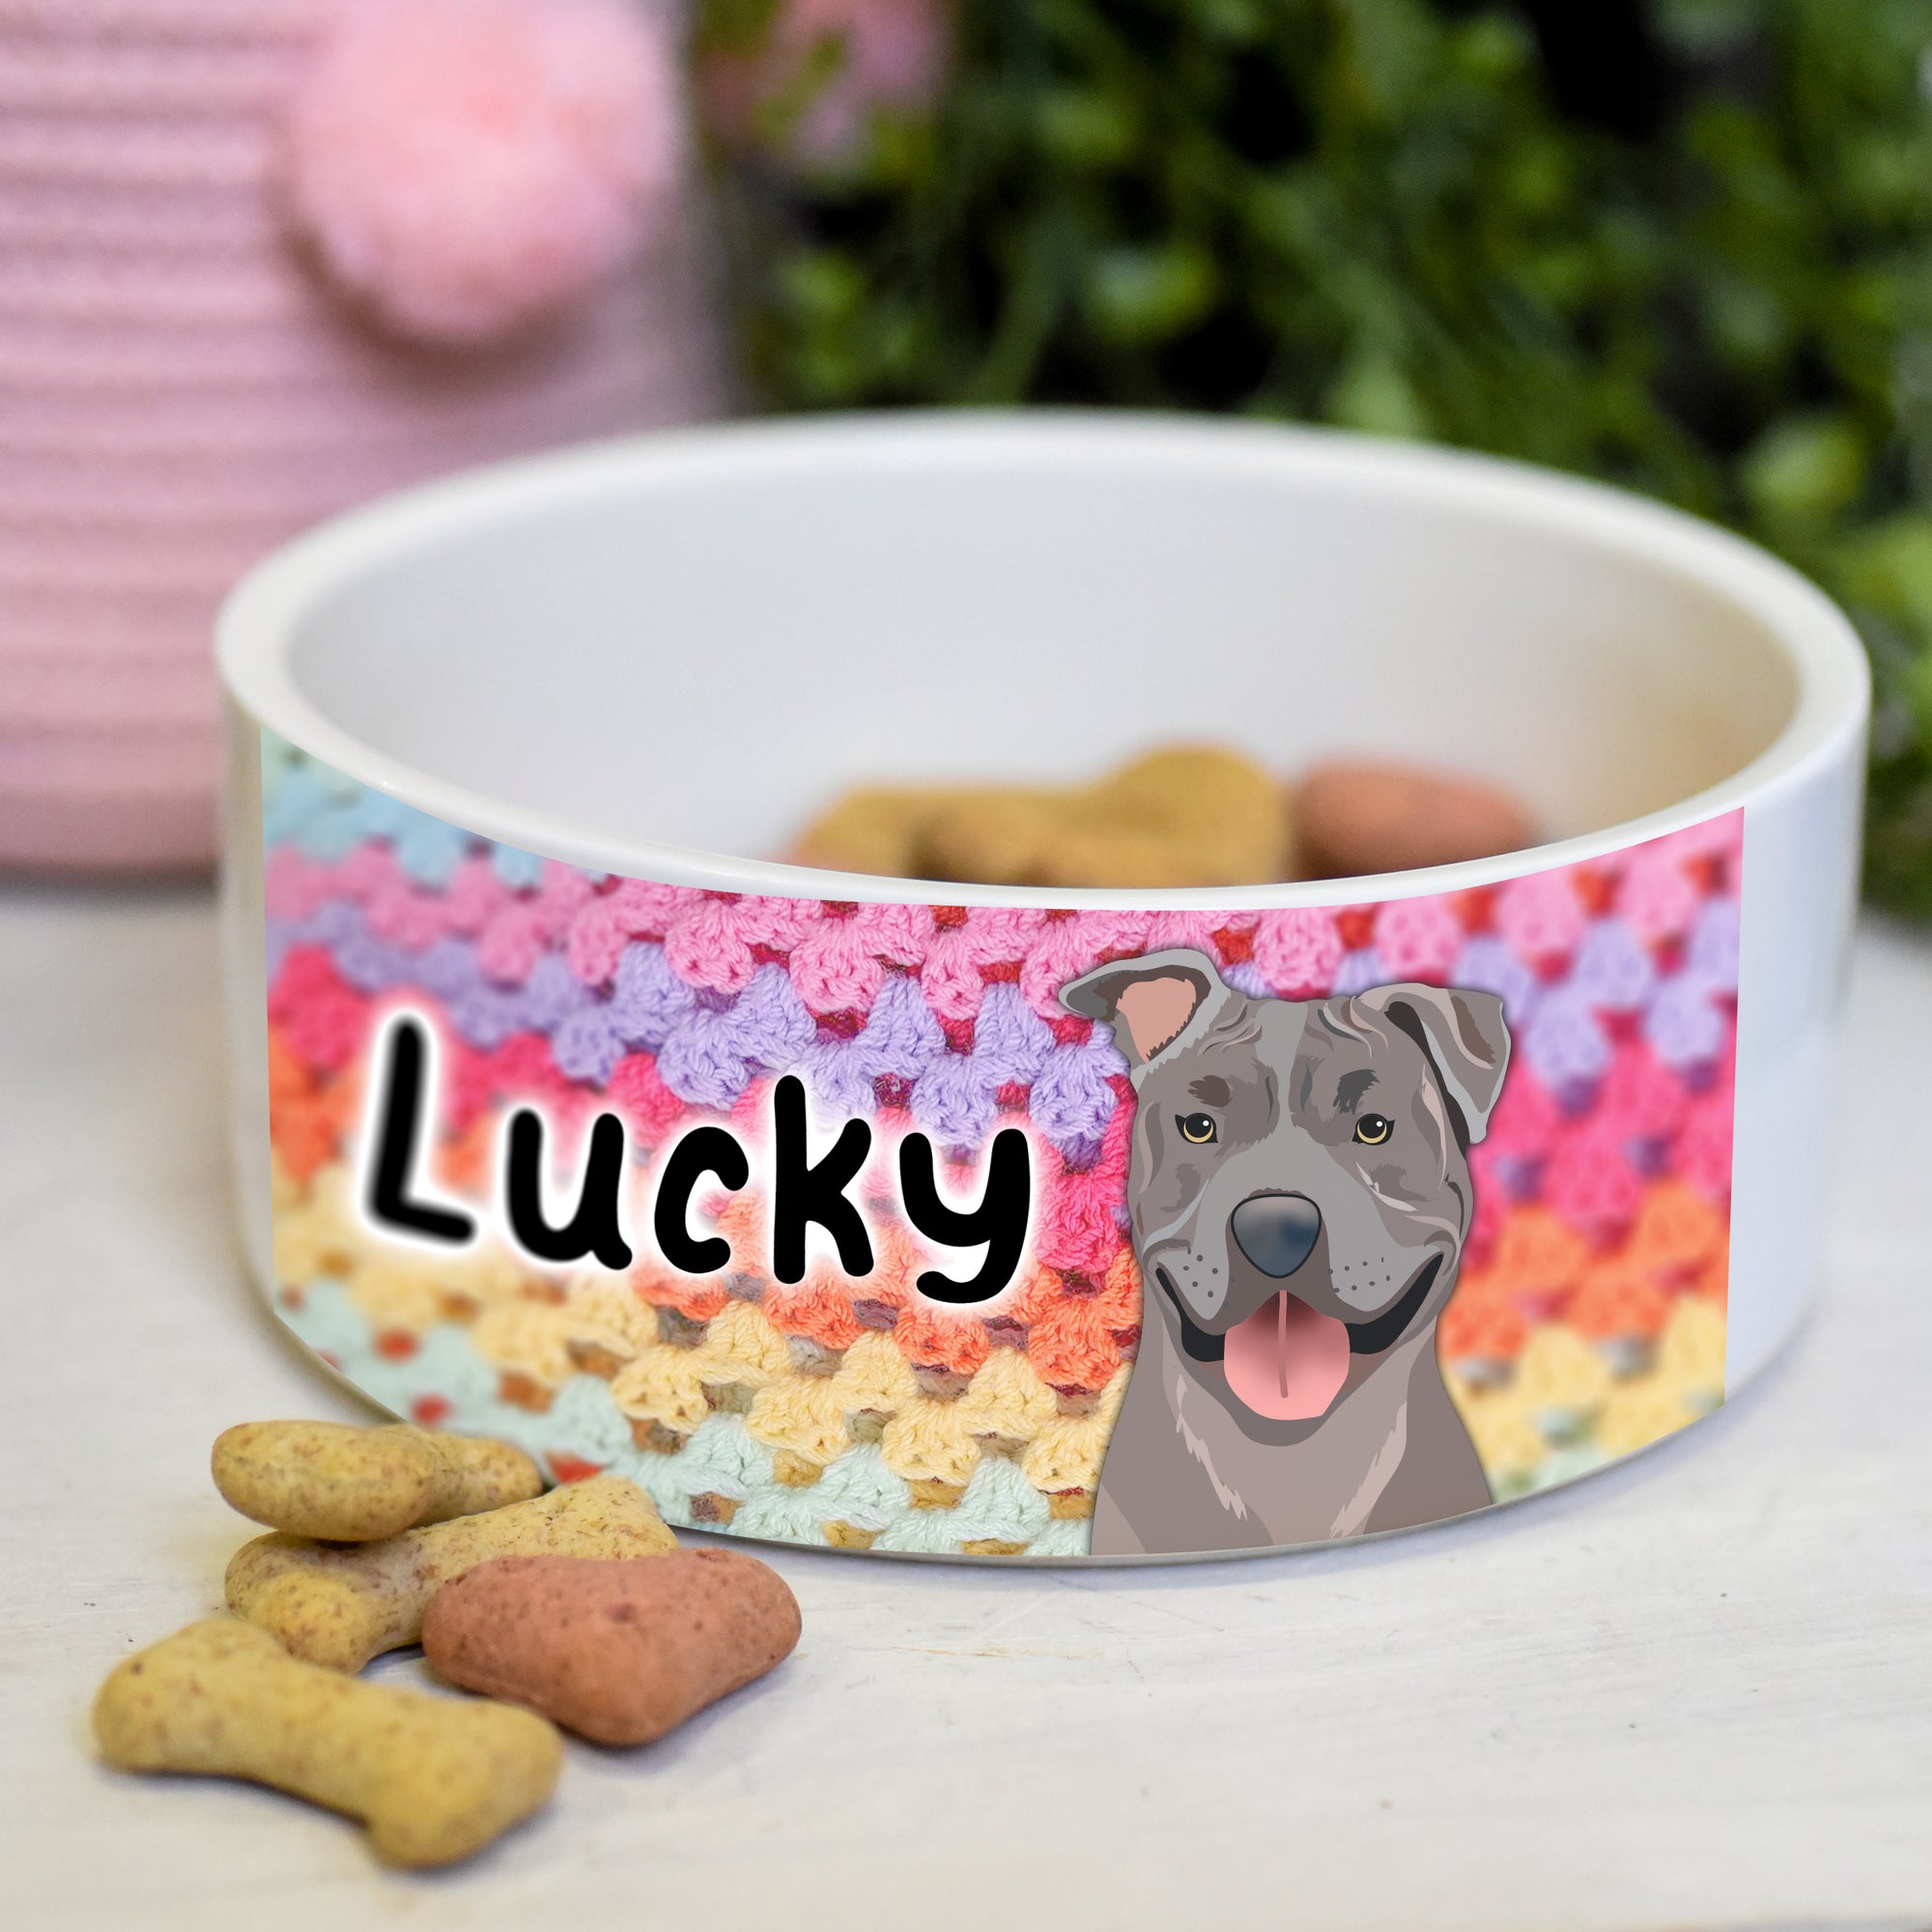 Personalised Ceramic Dog Bowl - Rainbow Crochet Collection - Realistic Illustrations